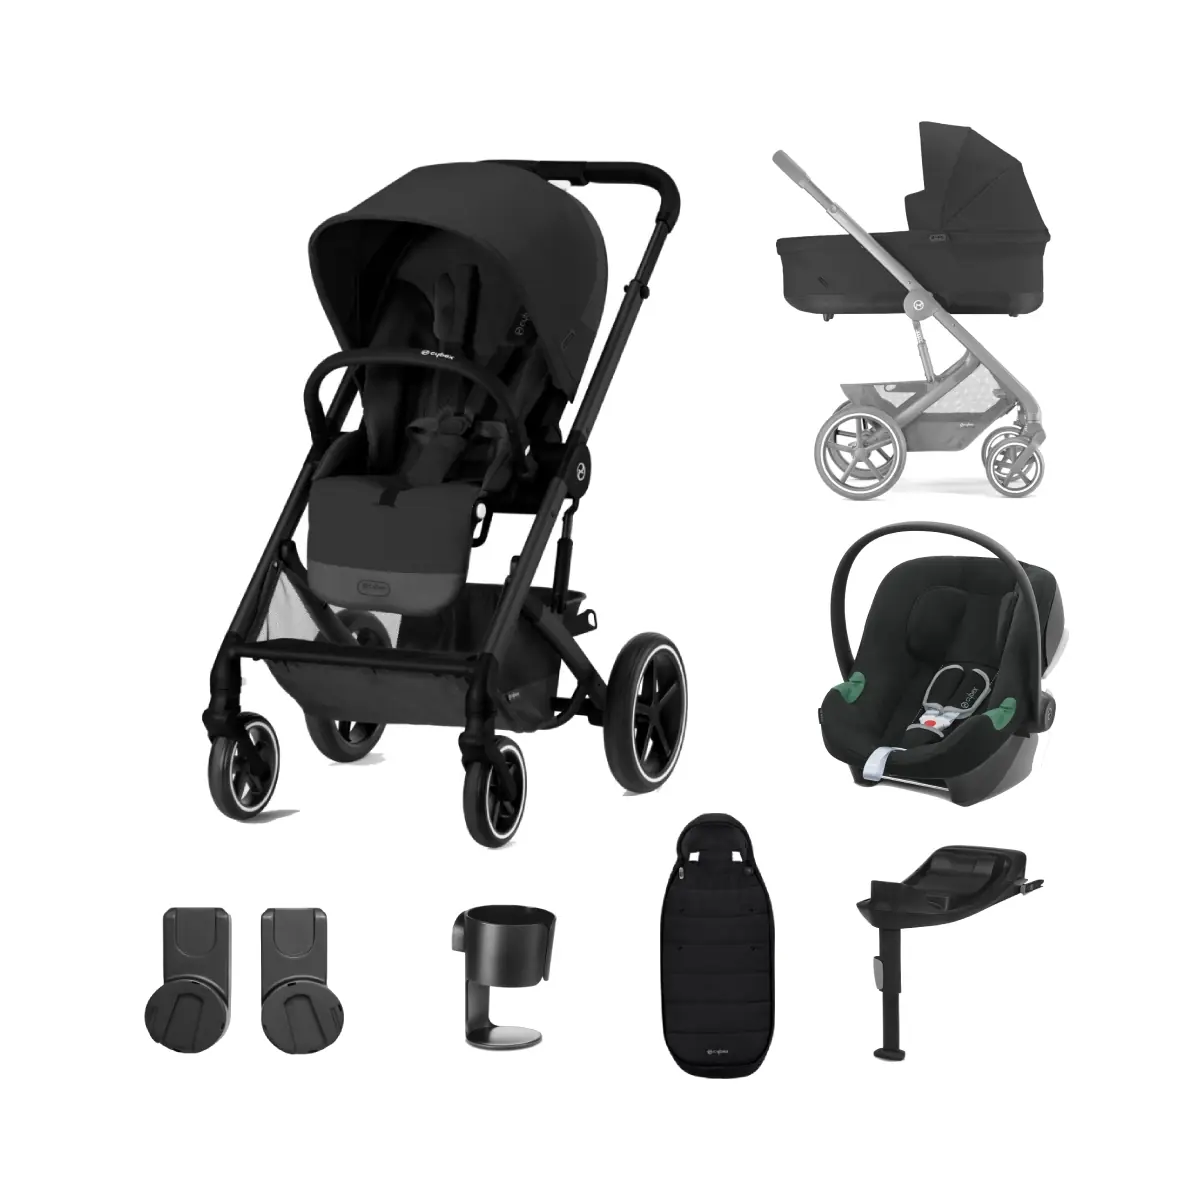 Cybex BALIOS S LUX - 2in1 pushchair with carrycot, Moon Black, Black frame  Moon Black, Prams